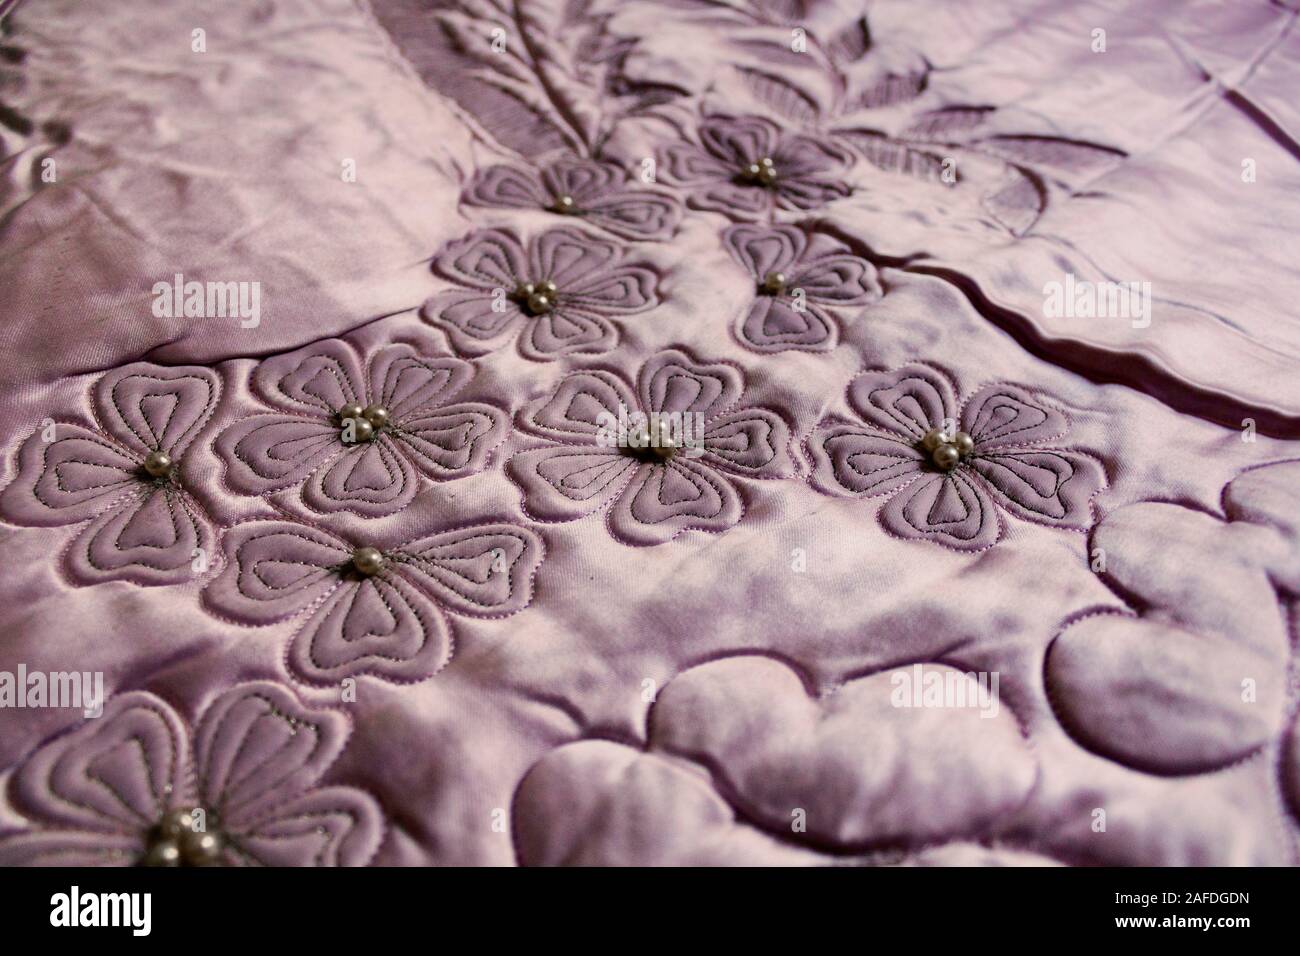 Hand quilting is still popular. Close up image of a quilt with petal leaves and pearls, from 1950s. Stock Photo